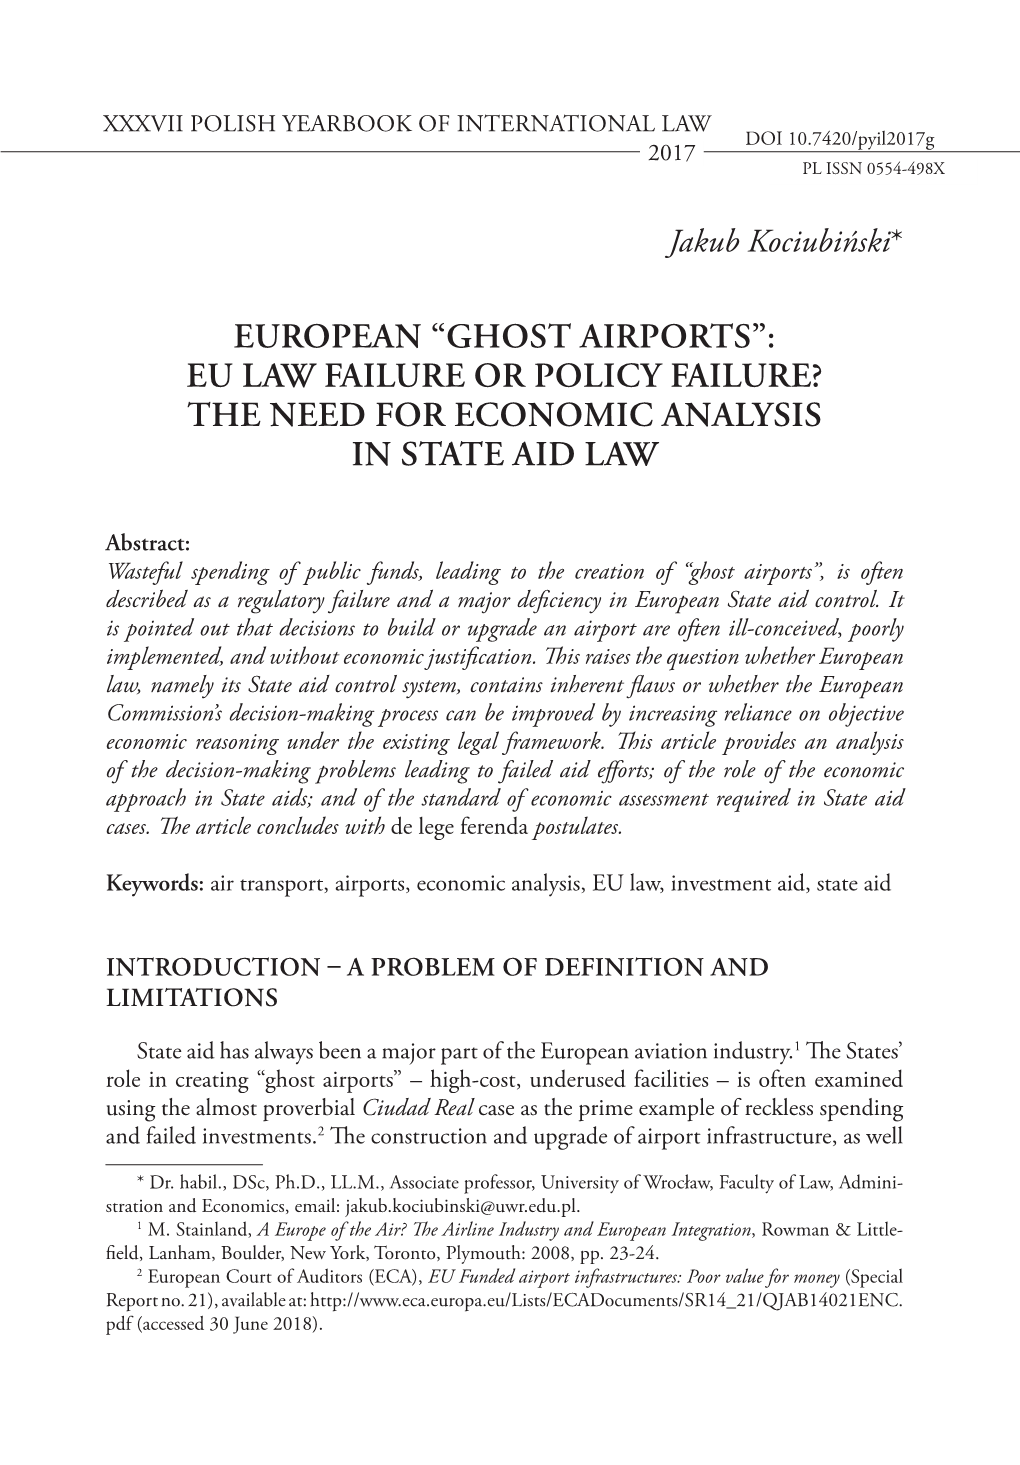 European “Ghost Airports”: EU Law Failure Or Policy Failure? the Need for Economic Analysis in State Aid Law